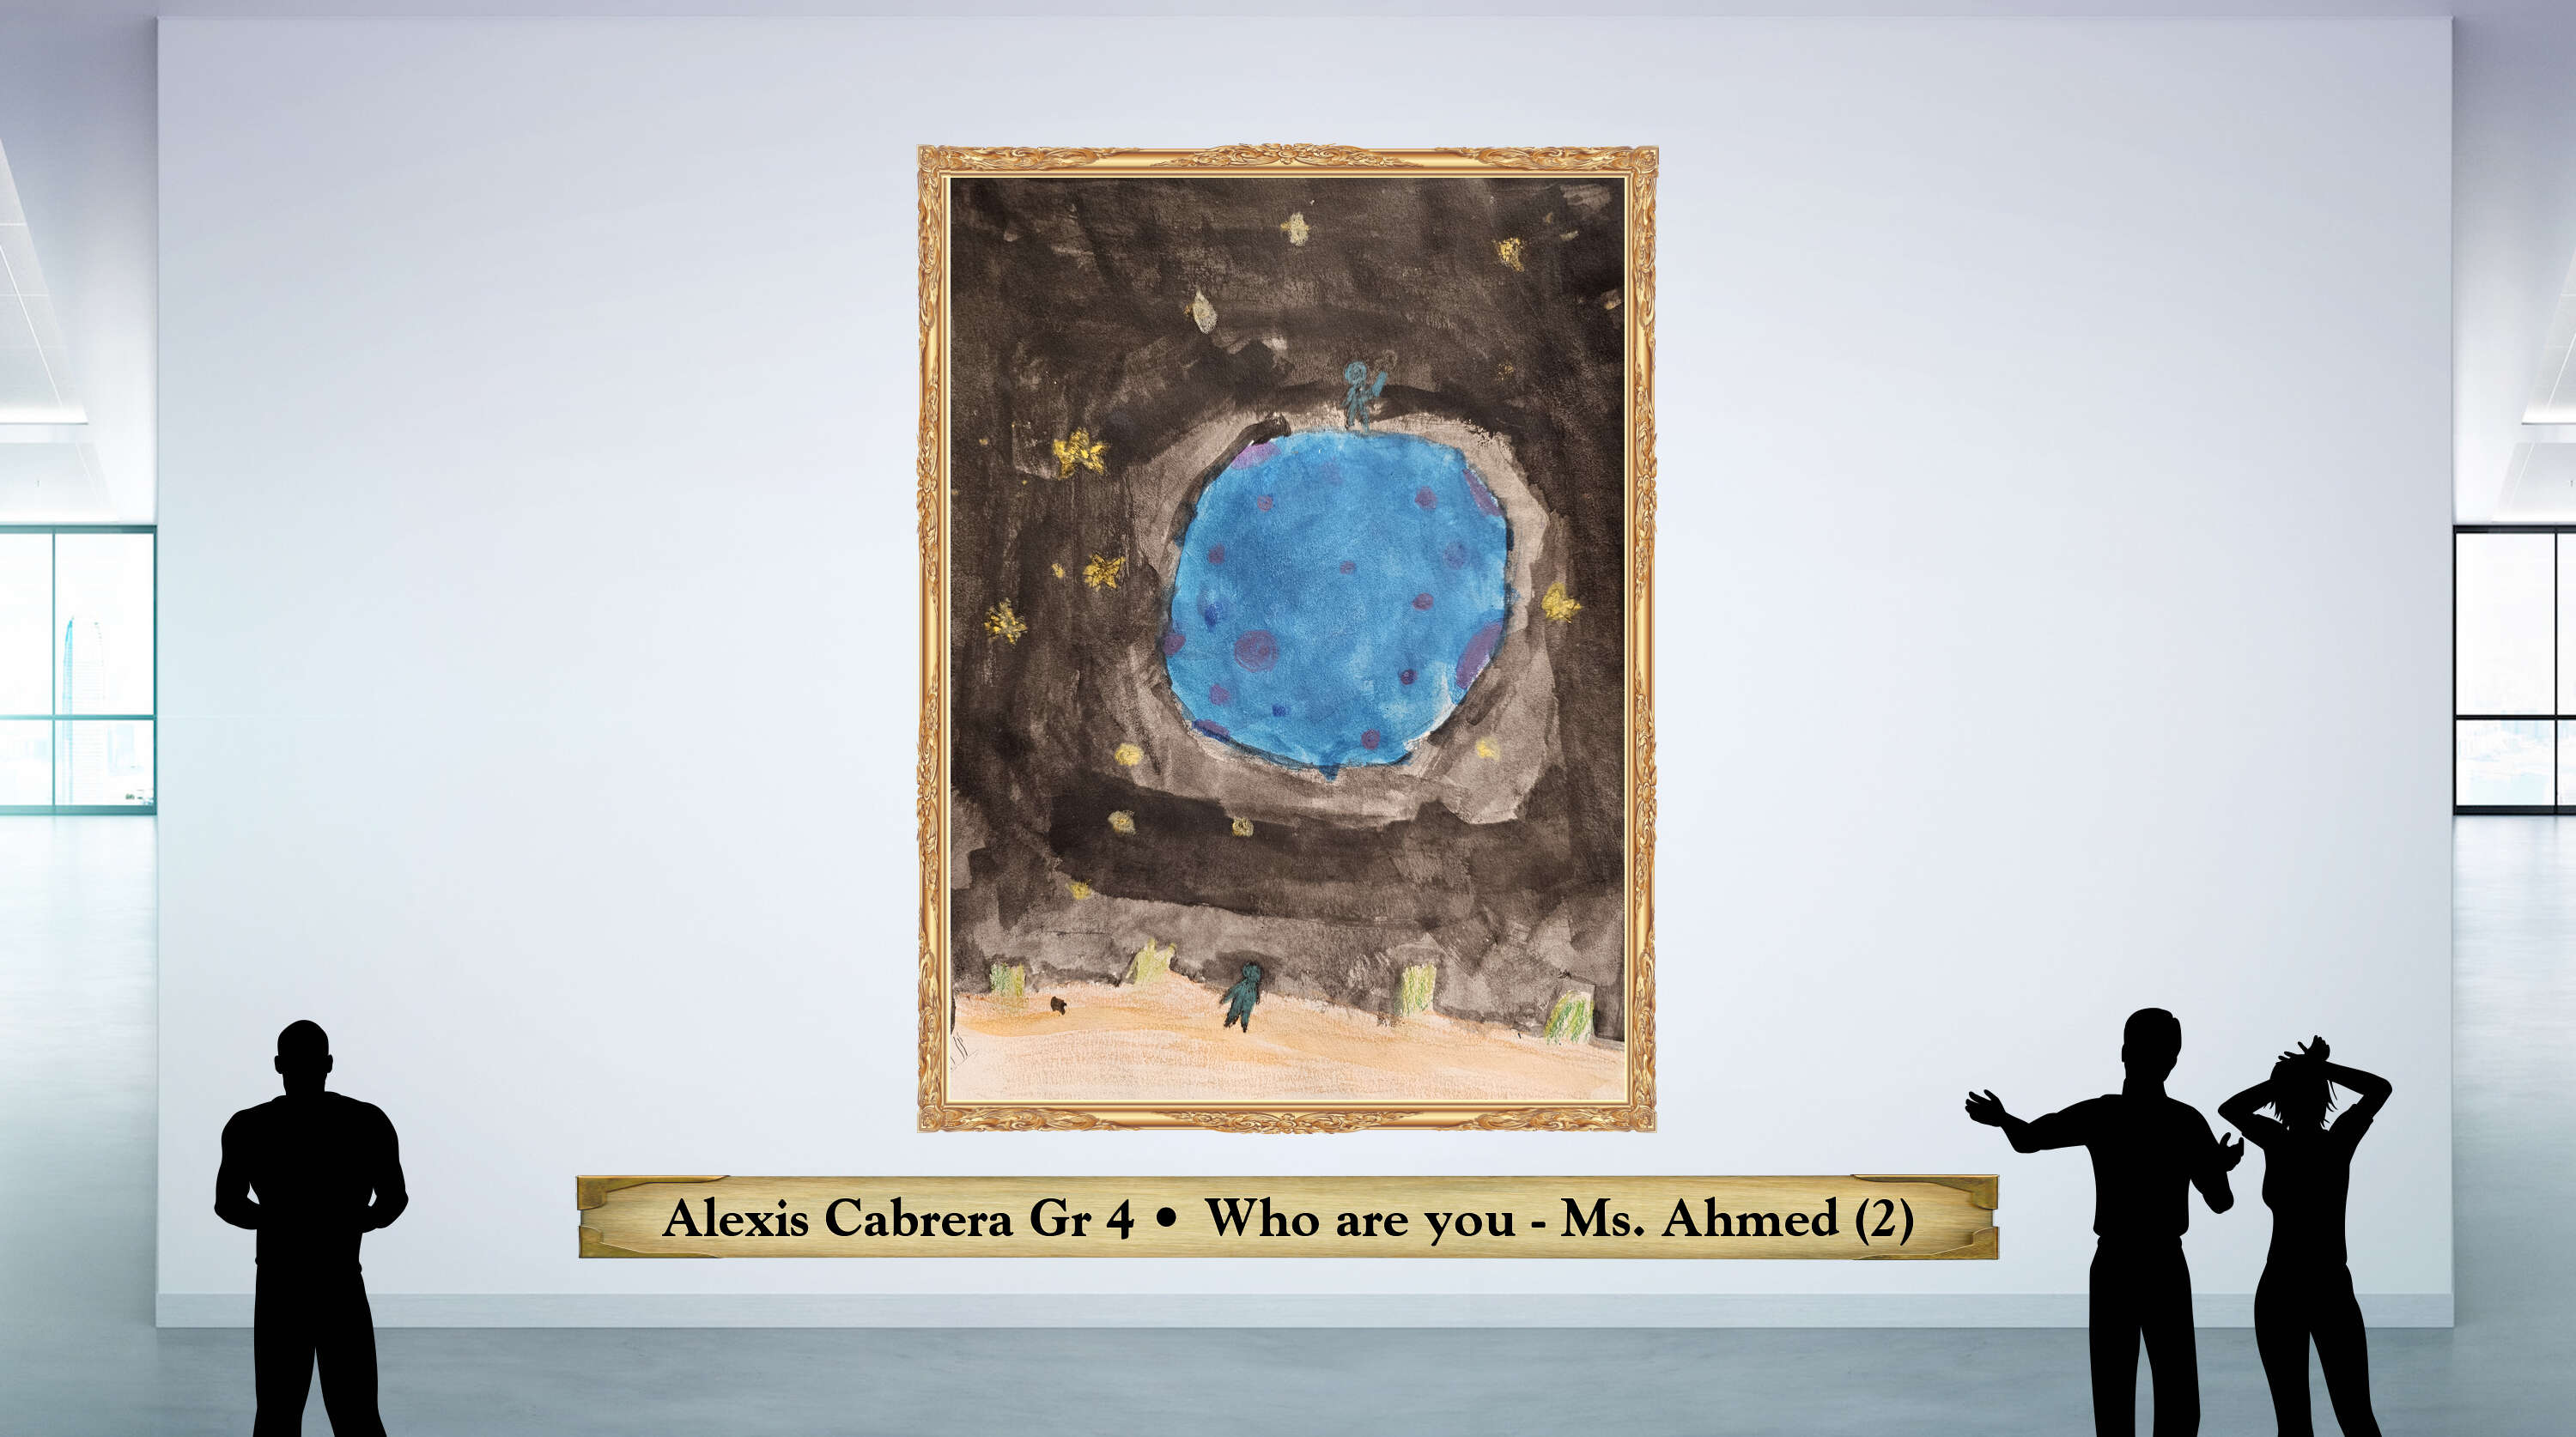 Alexis Cabrera Gr 4 • Who are you - Ms. Ahmed (2)